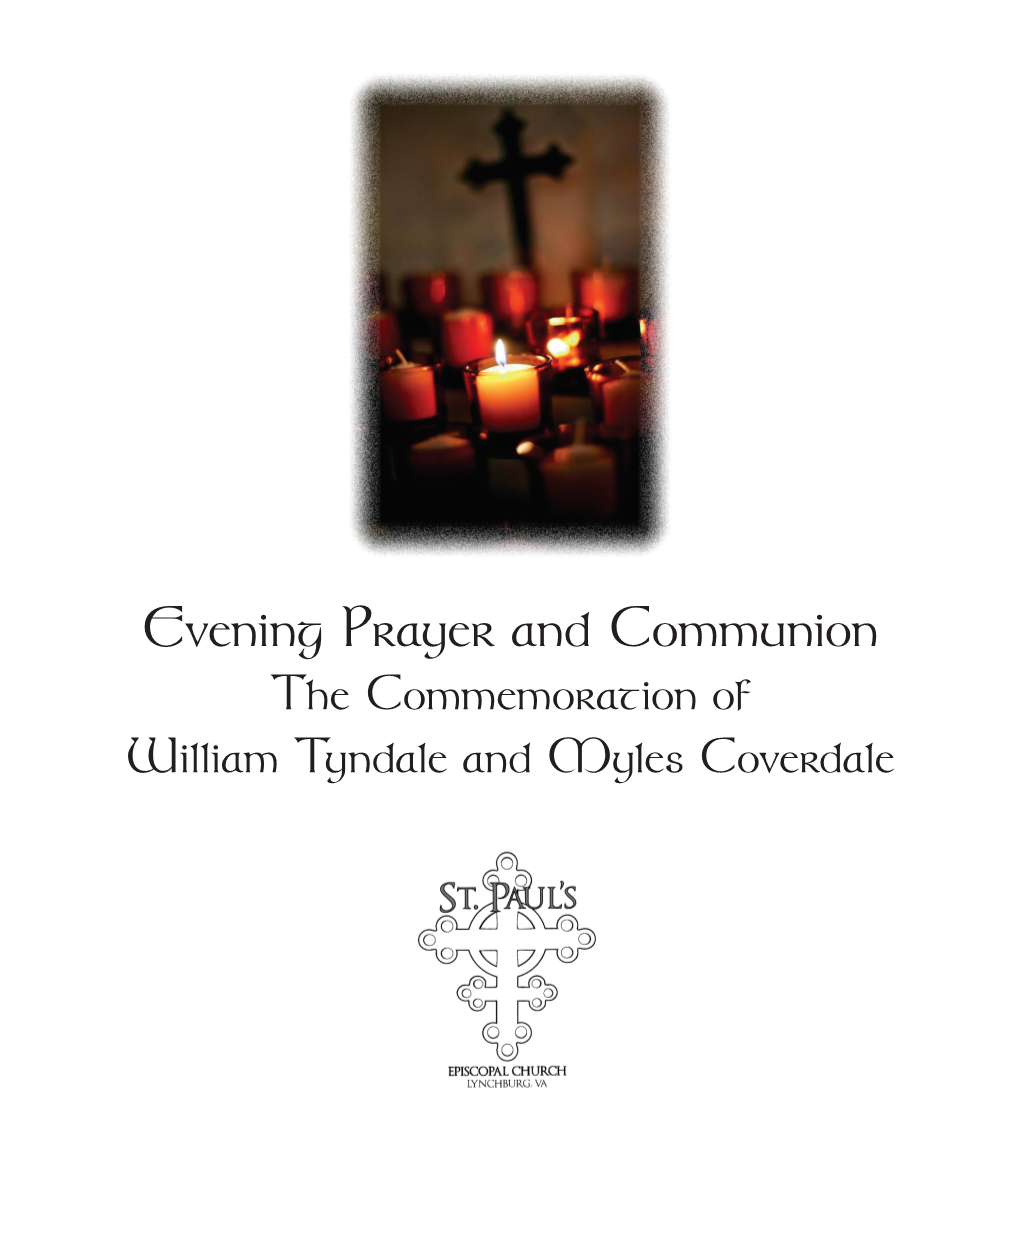 Evening Prayer and Communion the Commemoration of William Tyndale and Myles Coverdale